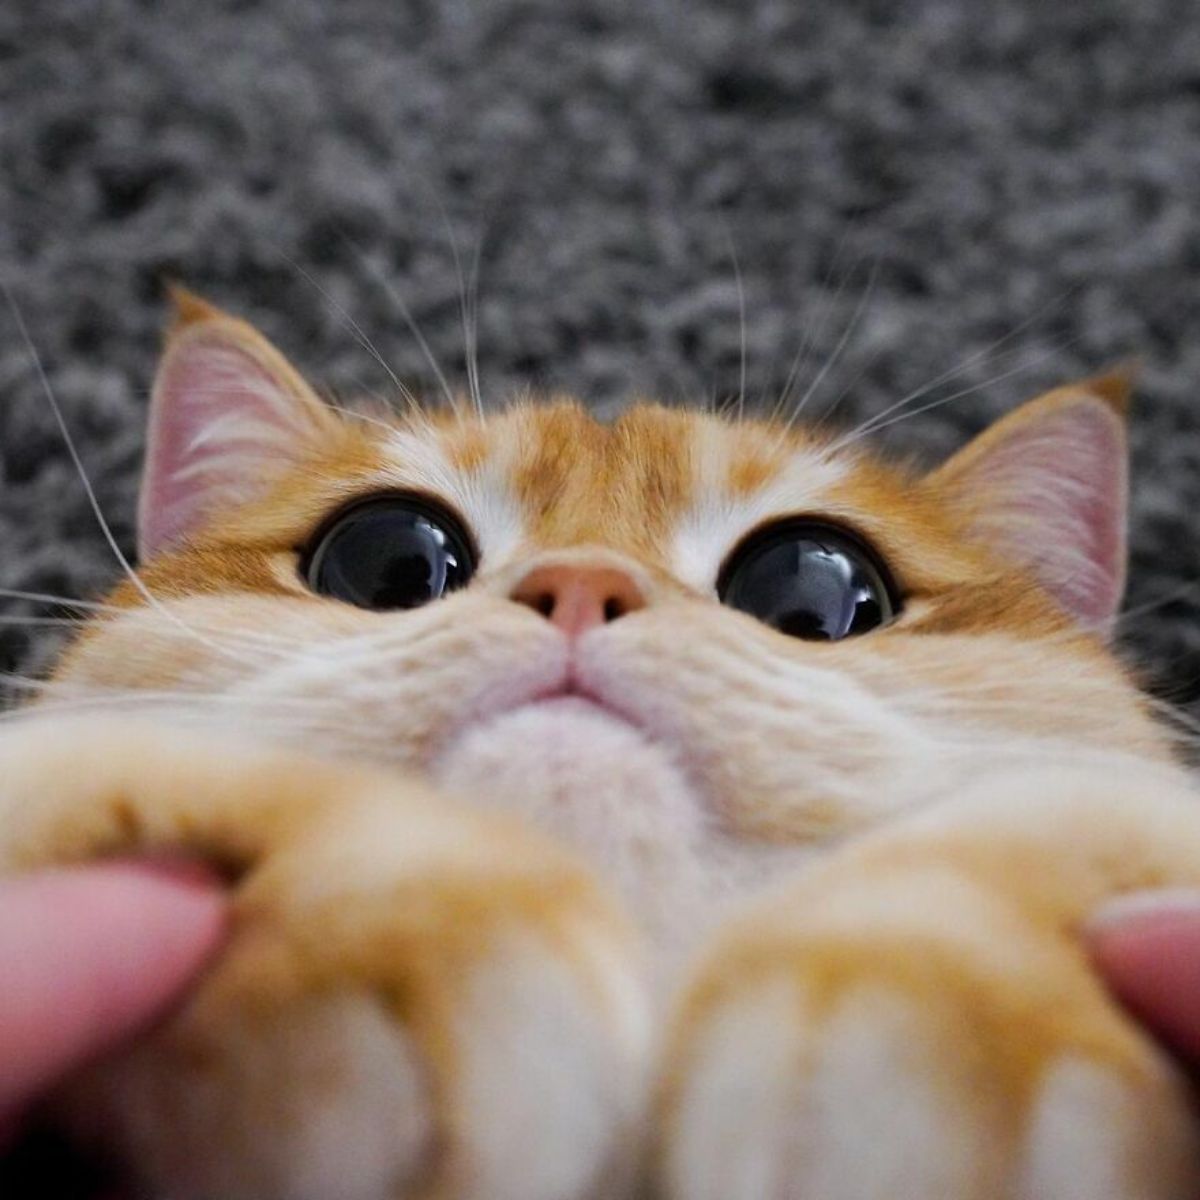 orange cat with large black eyes close up with front paws being held